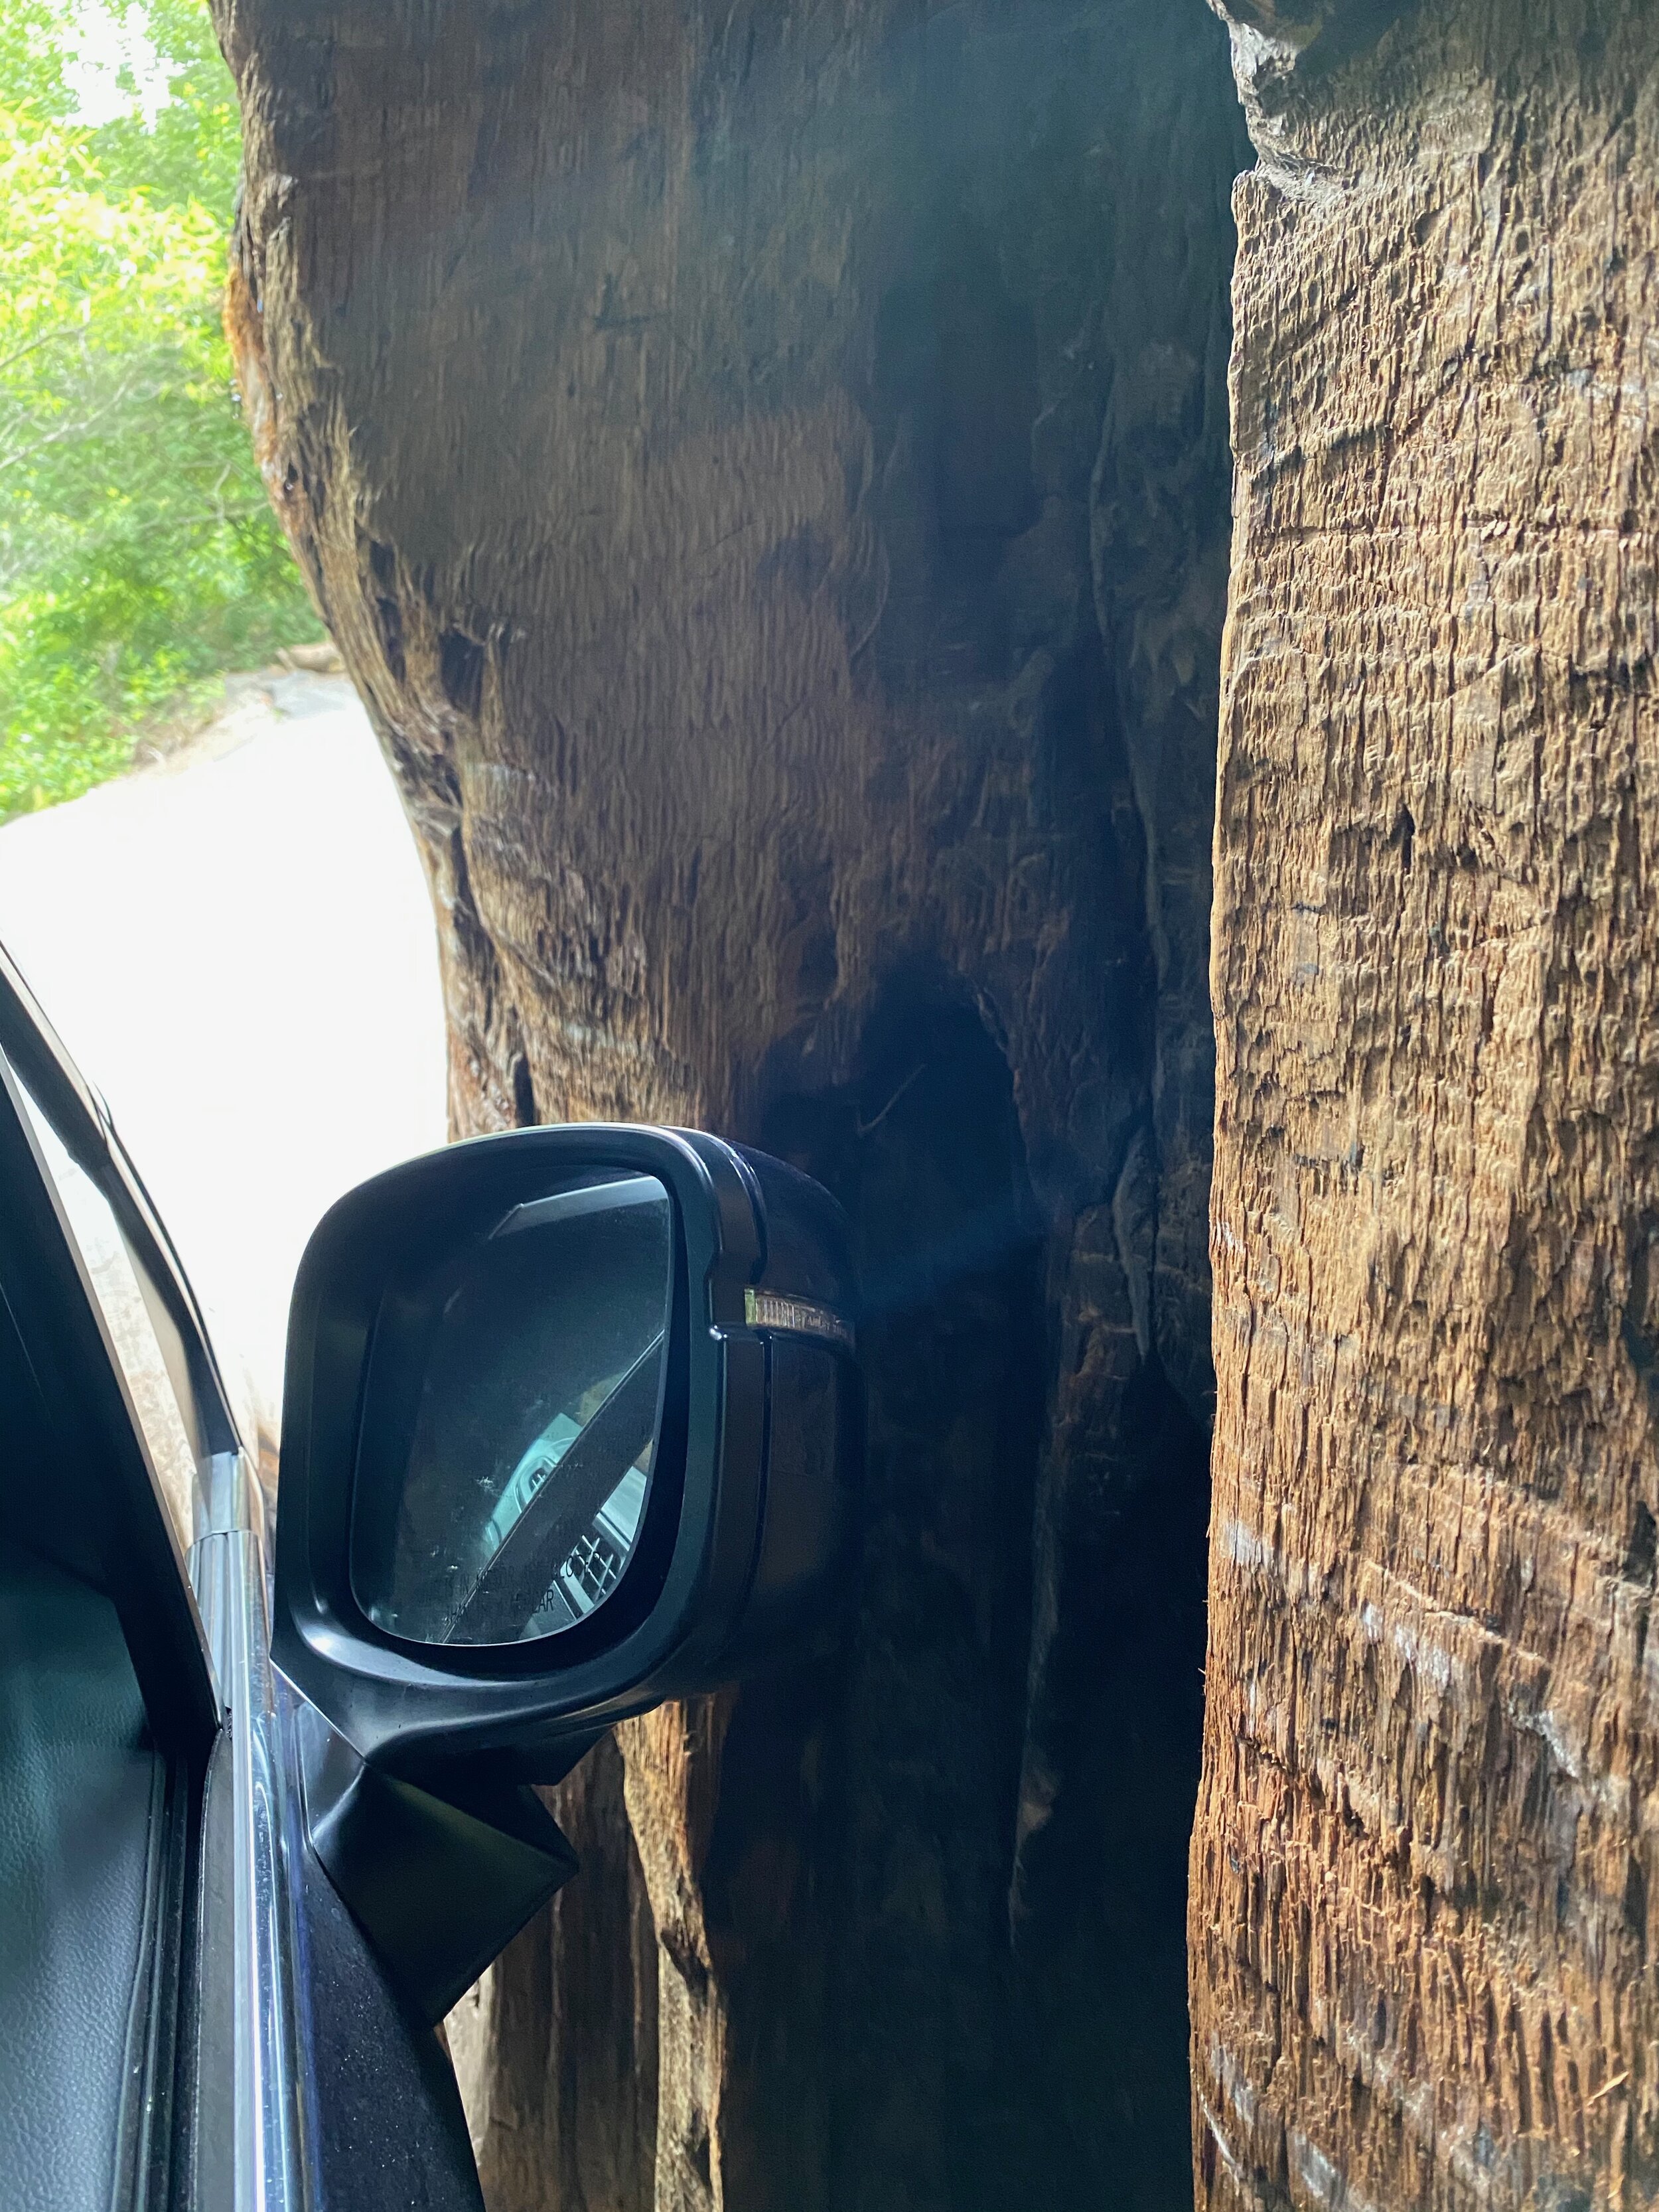 Yeah, it got kind of tight driving through this tree!  Photo by Karen Boudreaux, June 11, 2021